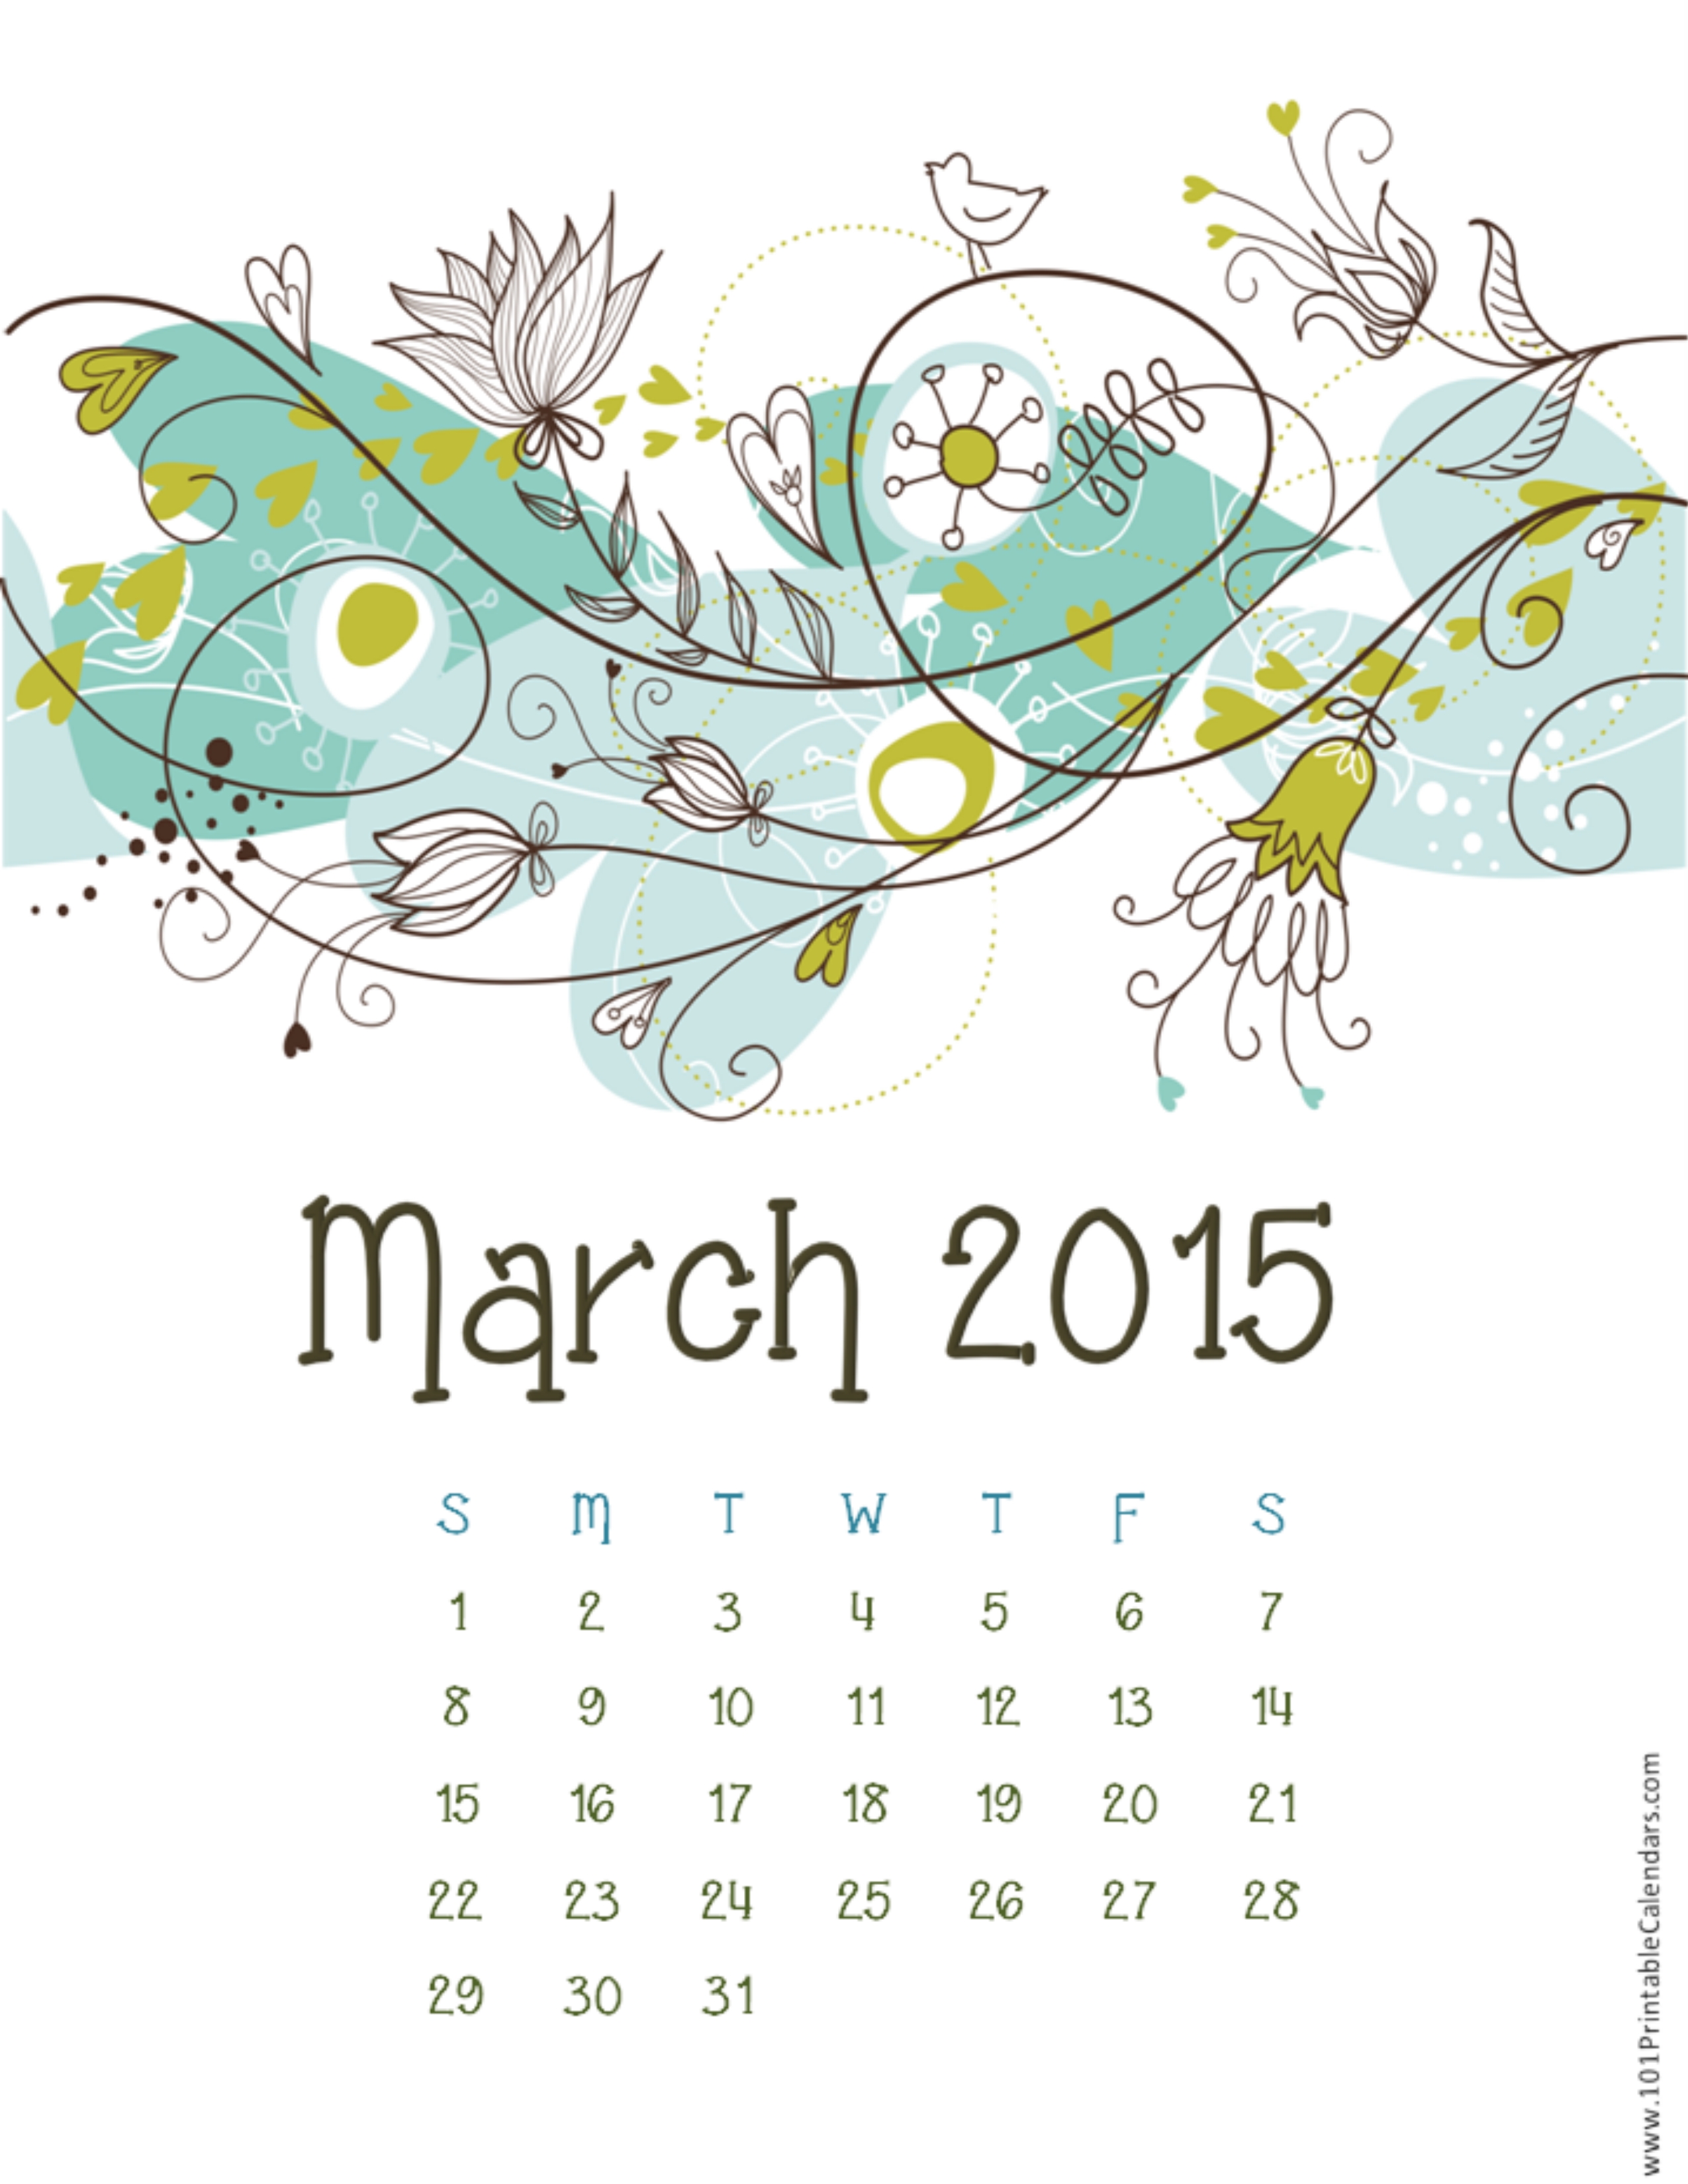 March Calendar Wallpaper Pictures And Jpg Gif Png Image Happy